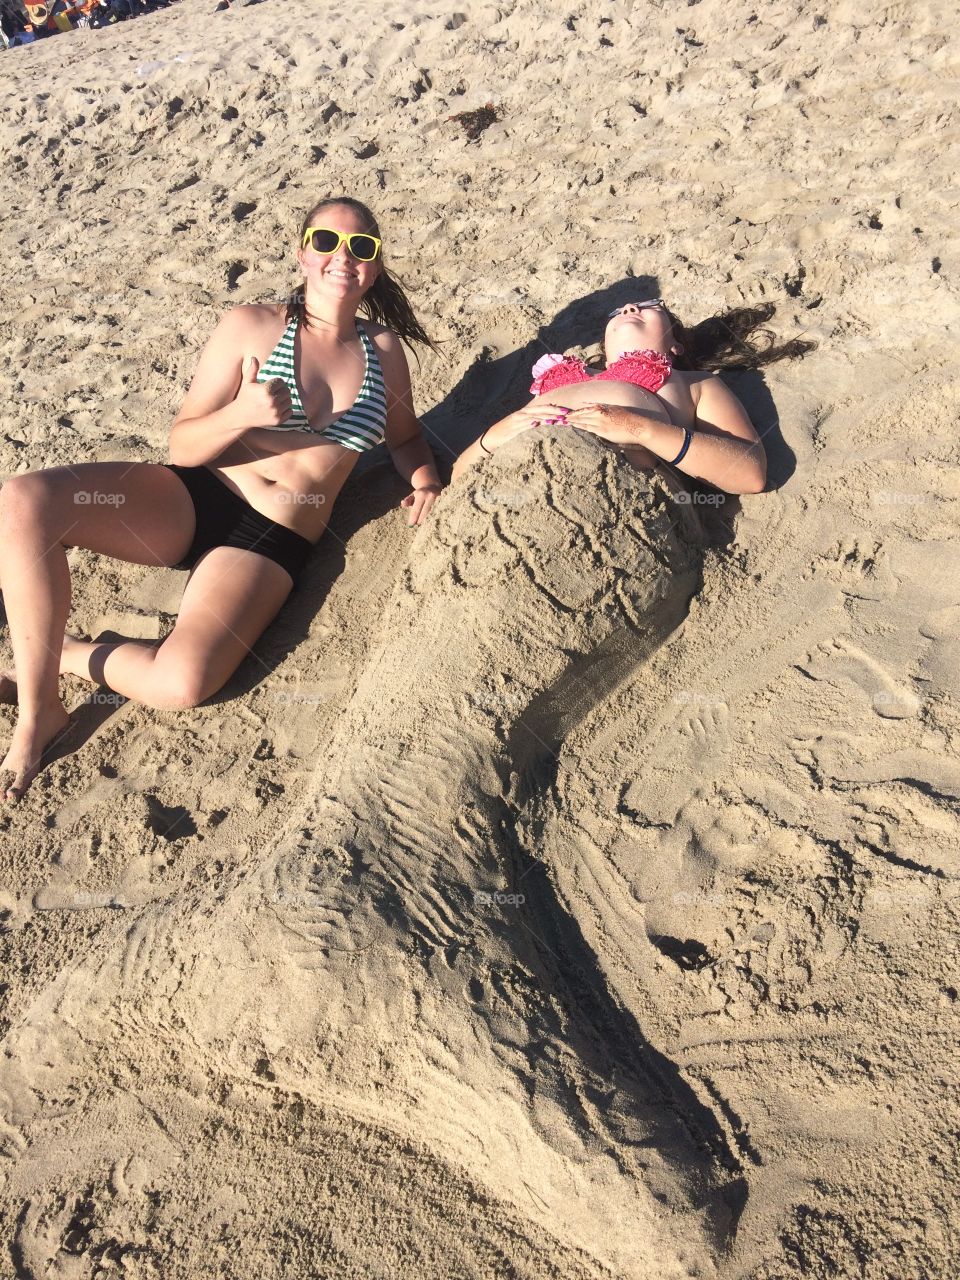 Two girls relaxing on a California beach in October, one enveloped in sand to look like a mermaid tail.